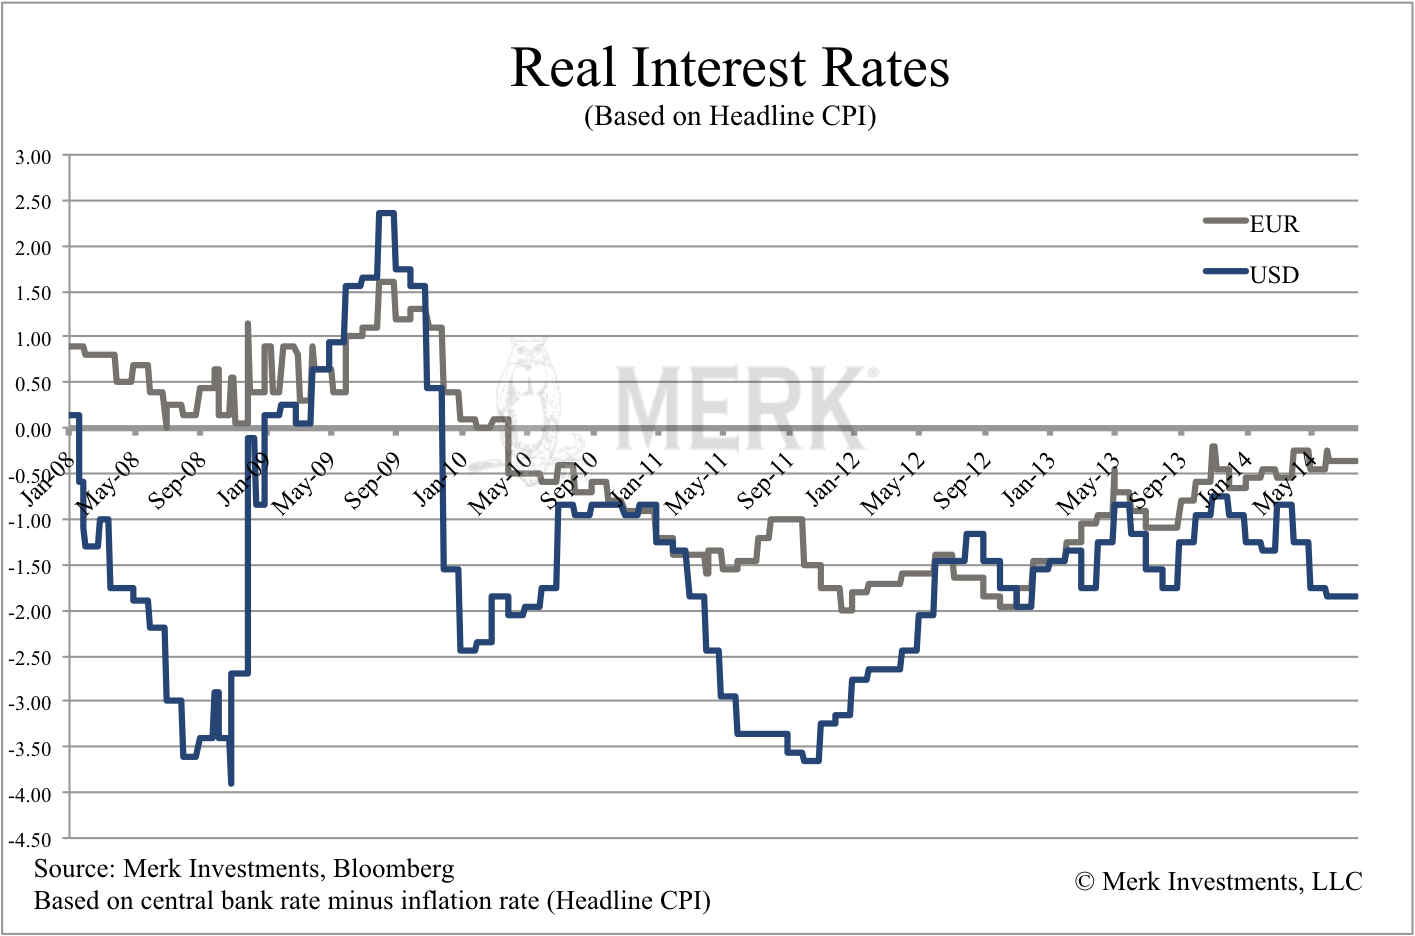 Real Interst Rates